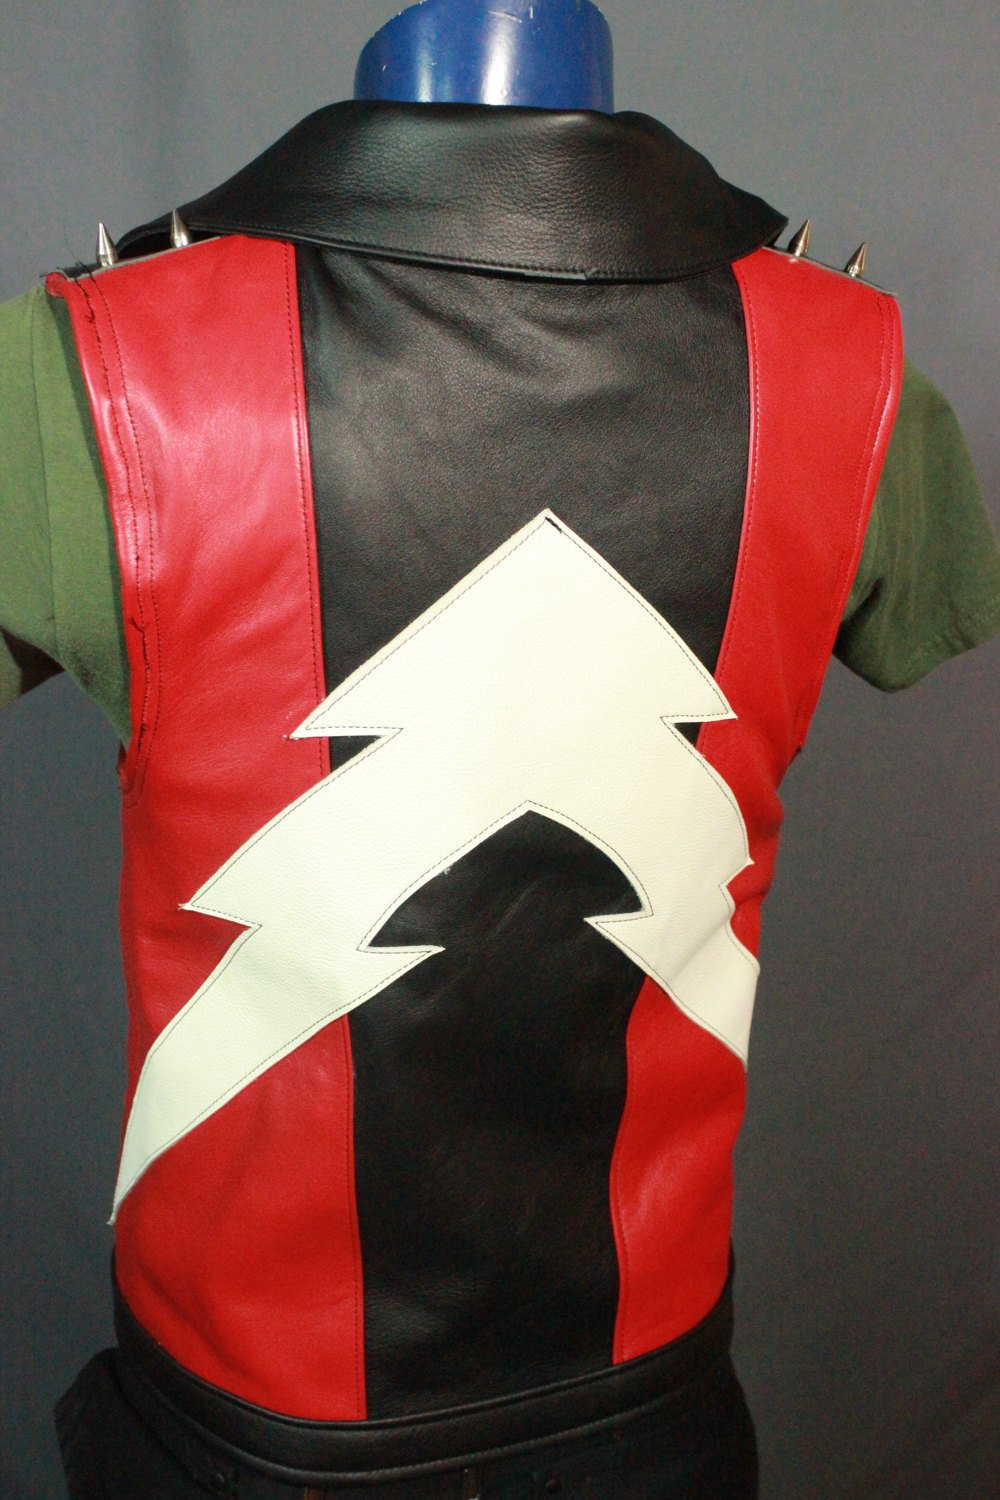 Amazing Black and Red Motorcycle Vest